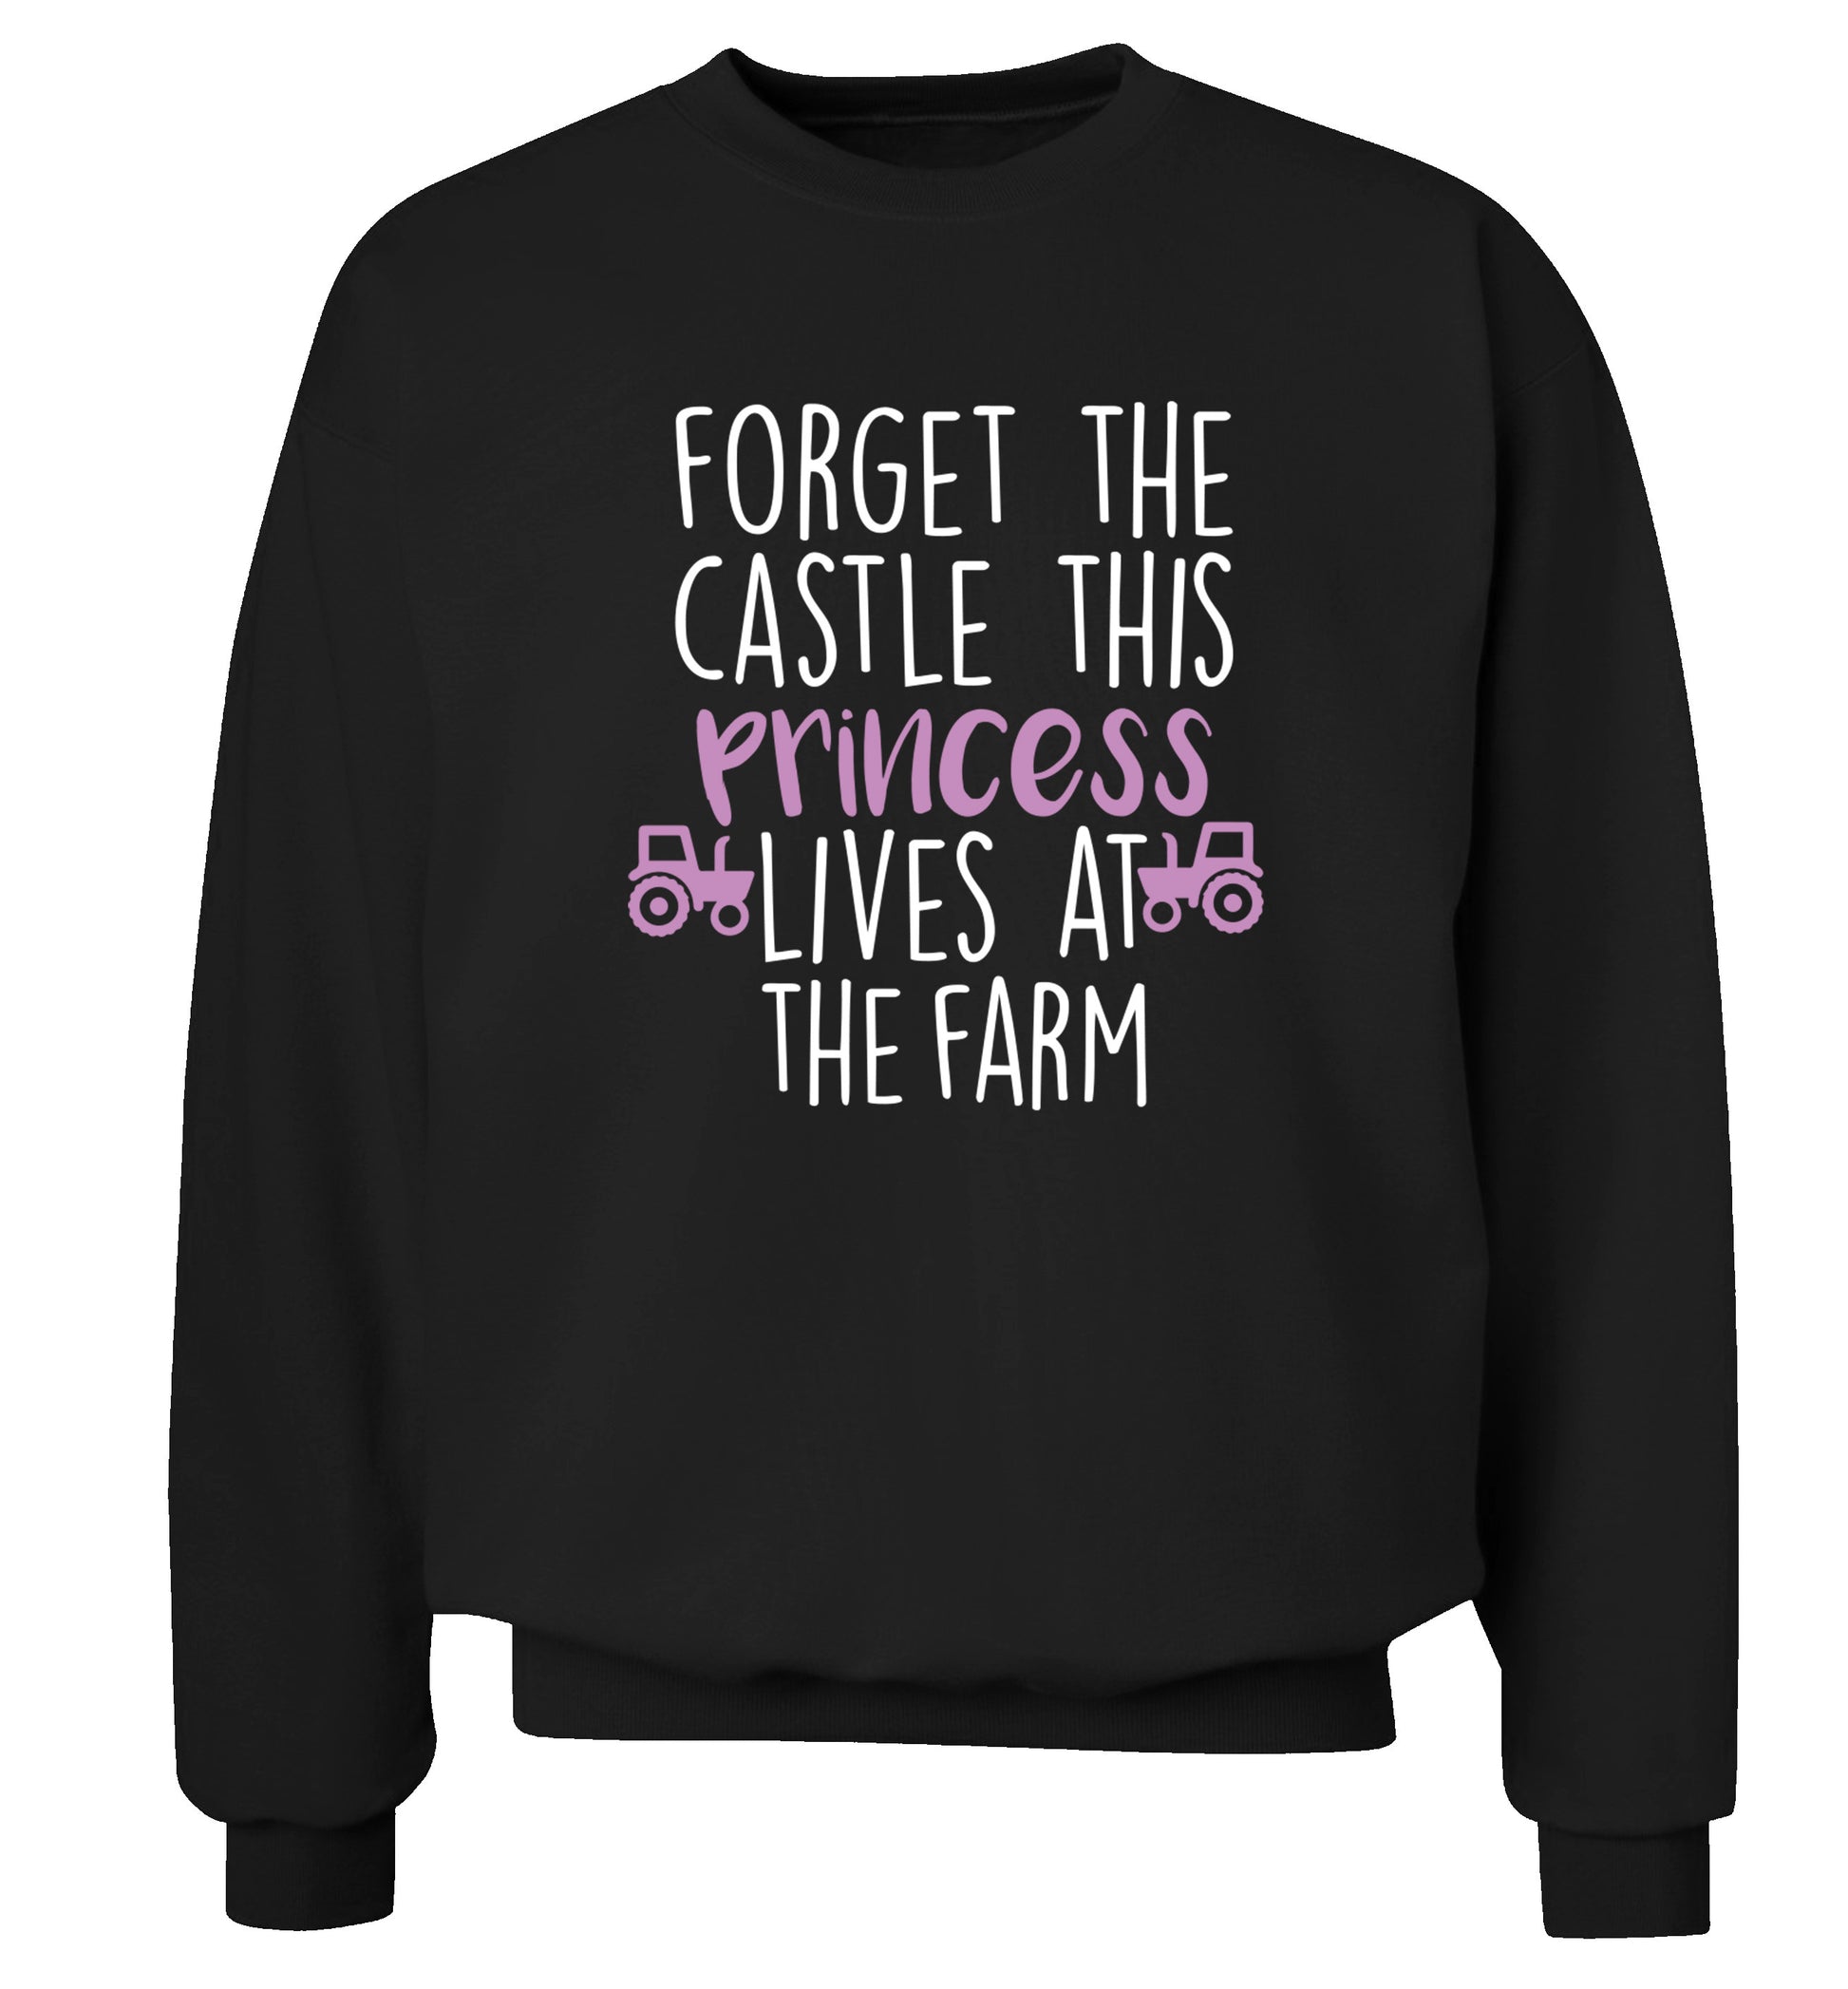 Forget the castle this princess lives at the farm Adult's unisex black Sweater 2XL